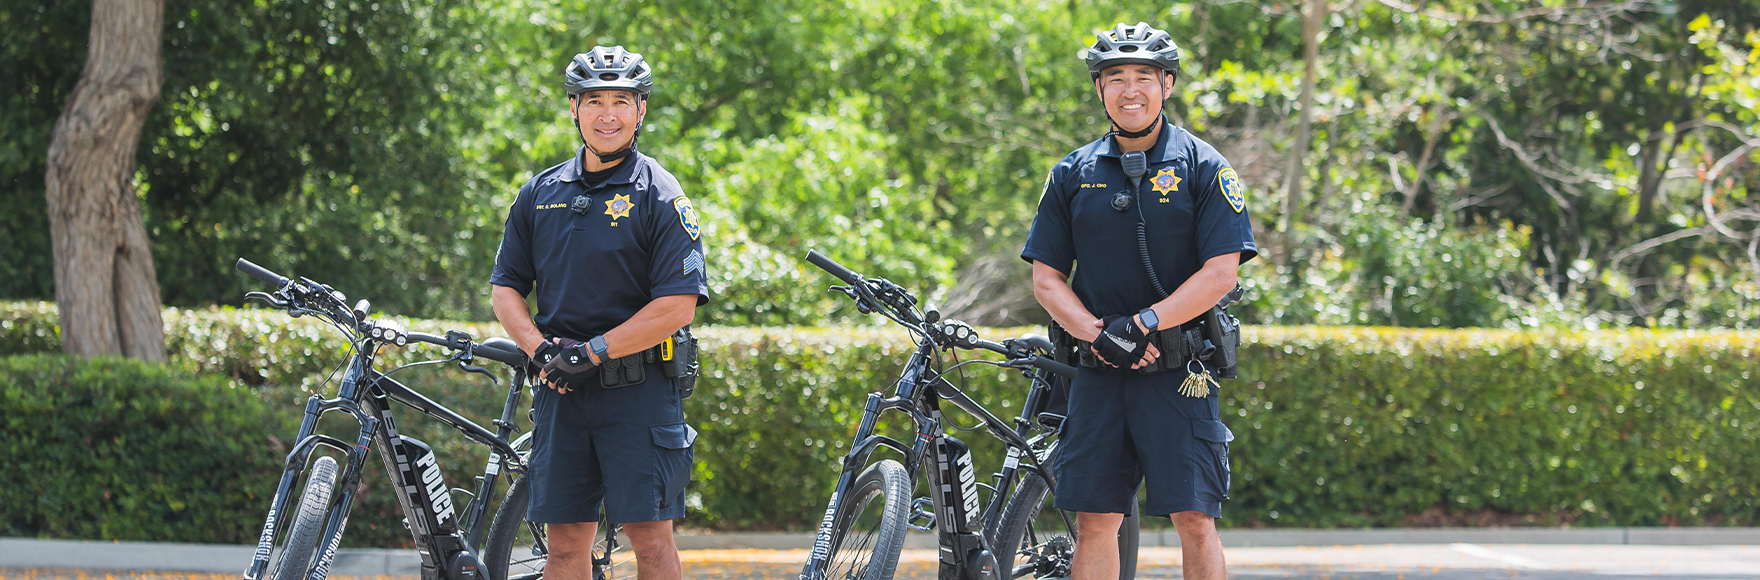 Sgt. Bolano and Ofc. Cho smiling next to their police bicycles